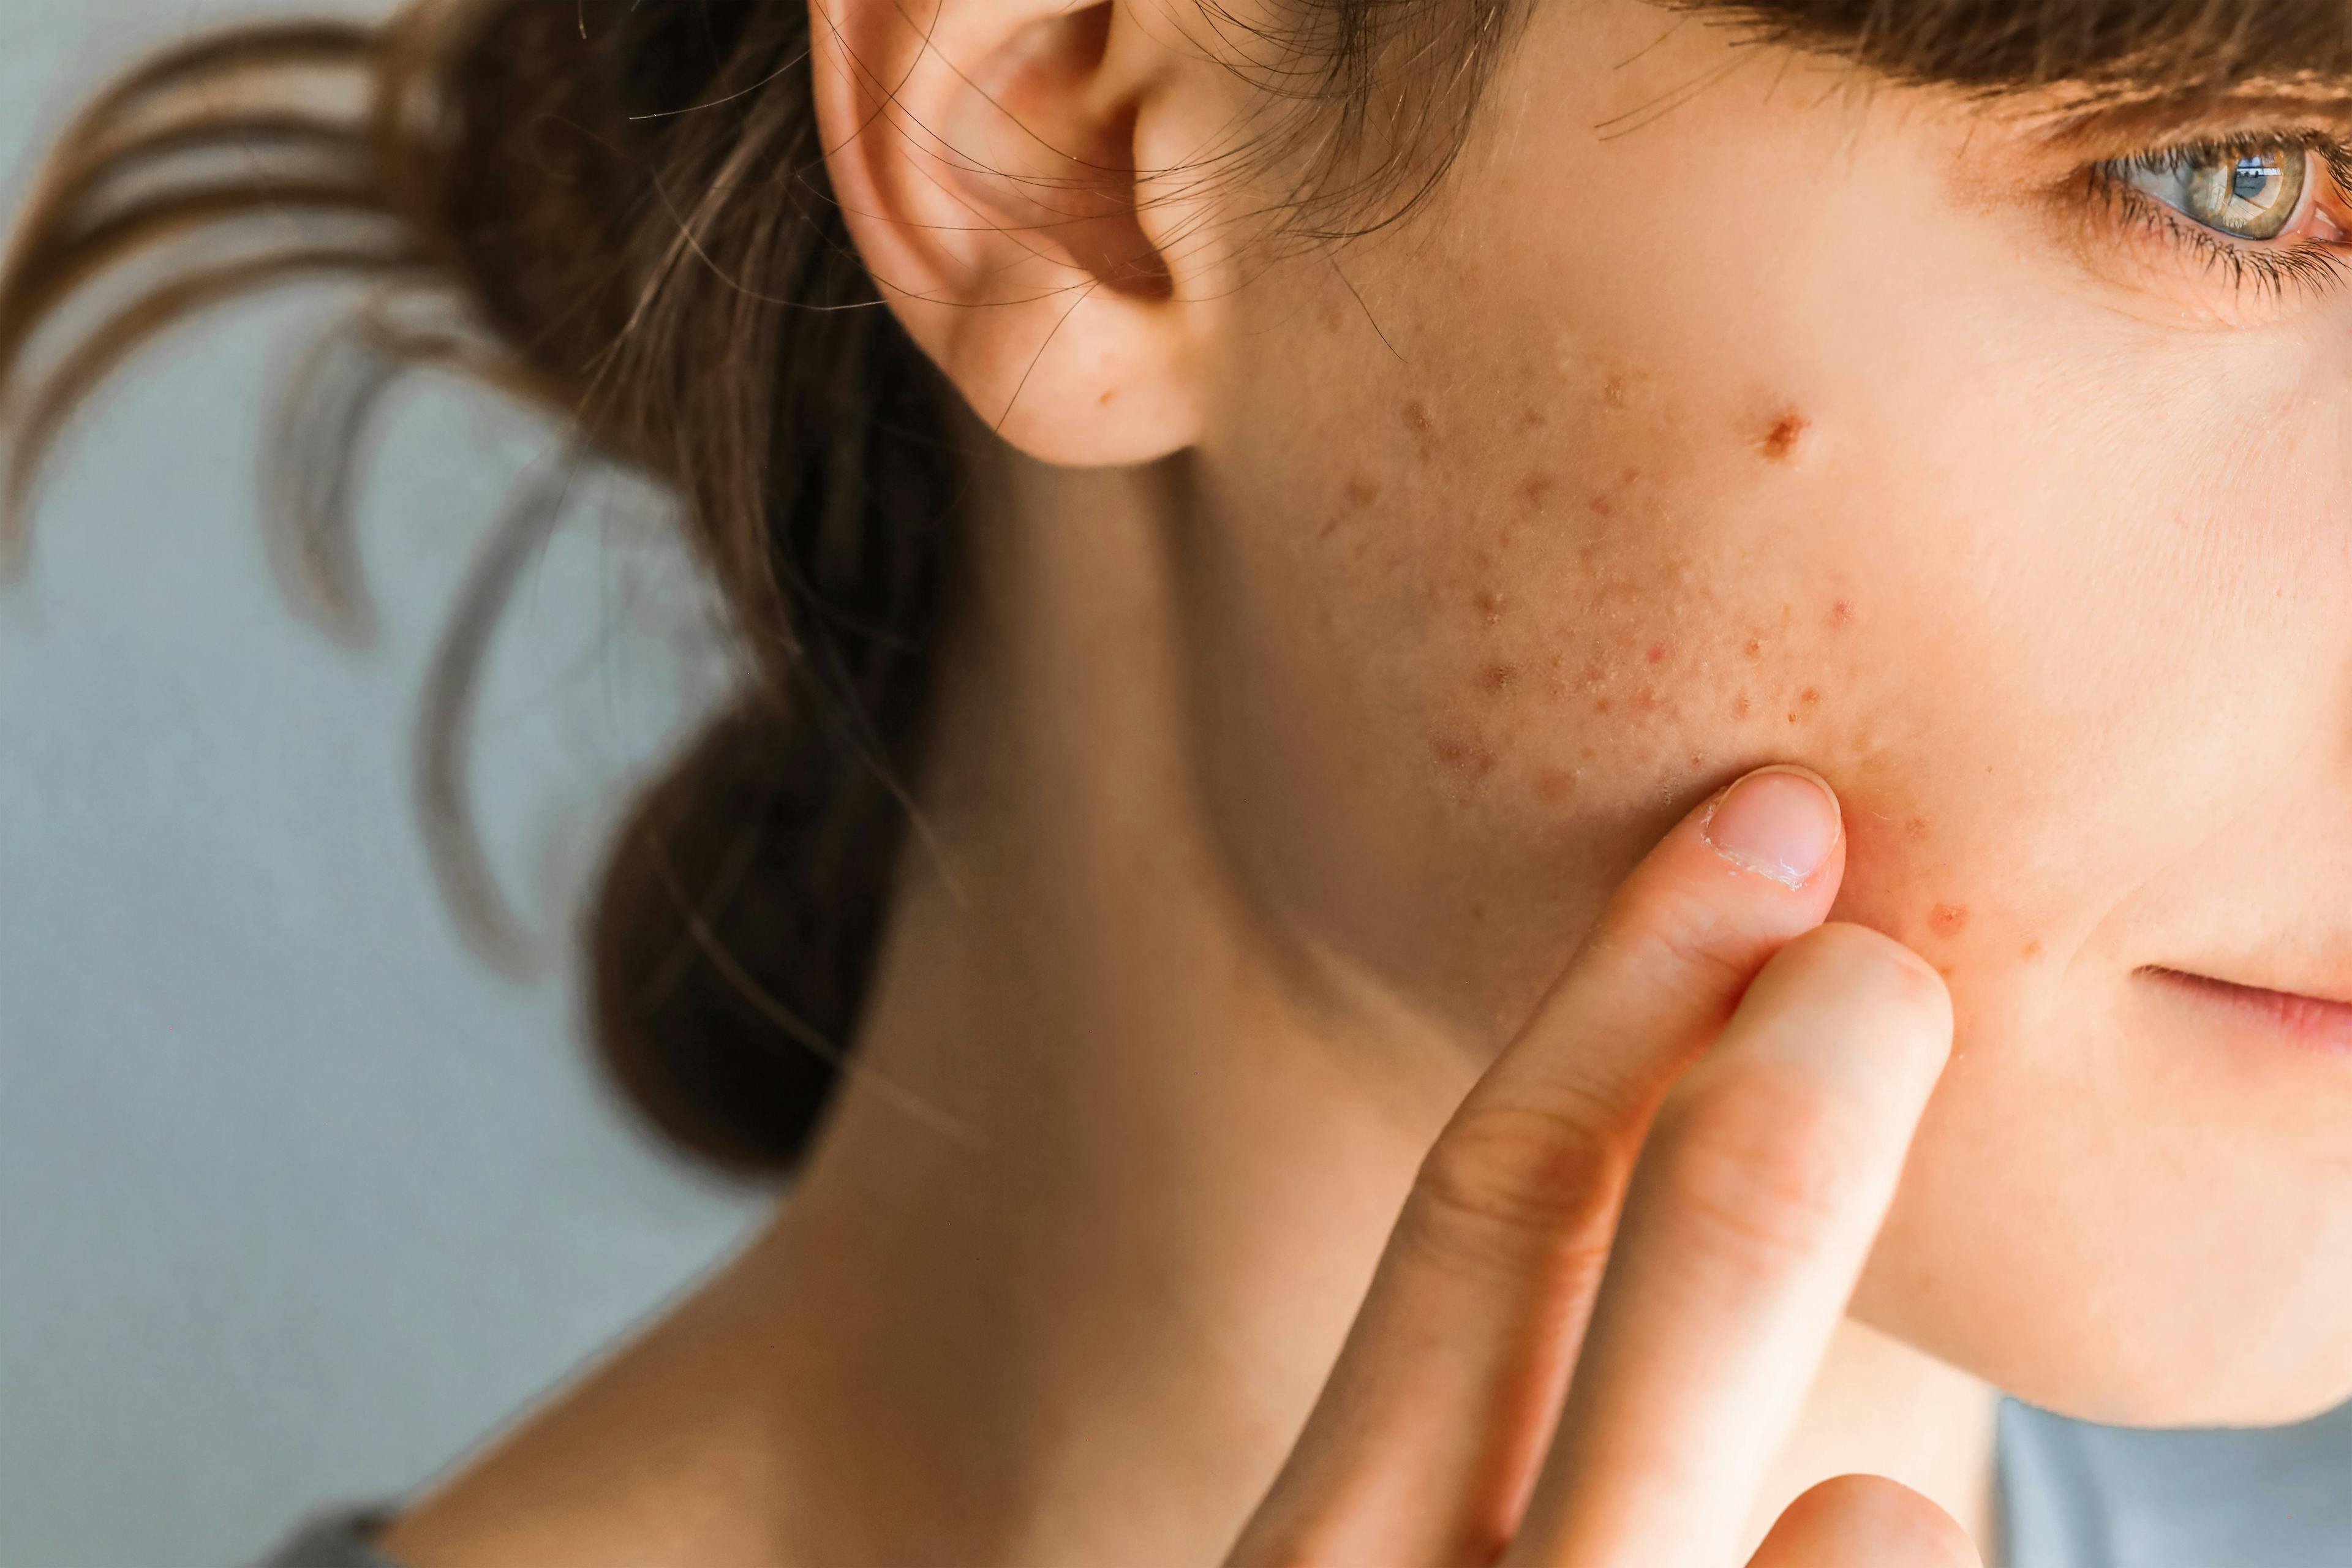 Acne Found to be Common Side Effect of Atopic Dermatitis Treatment